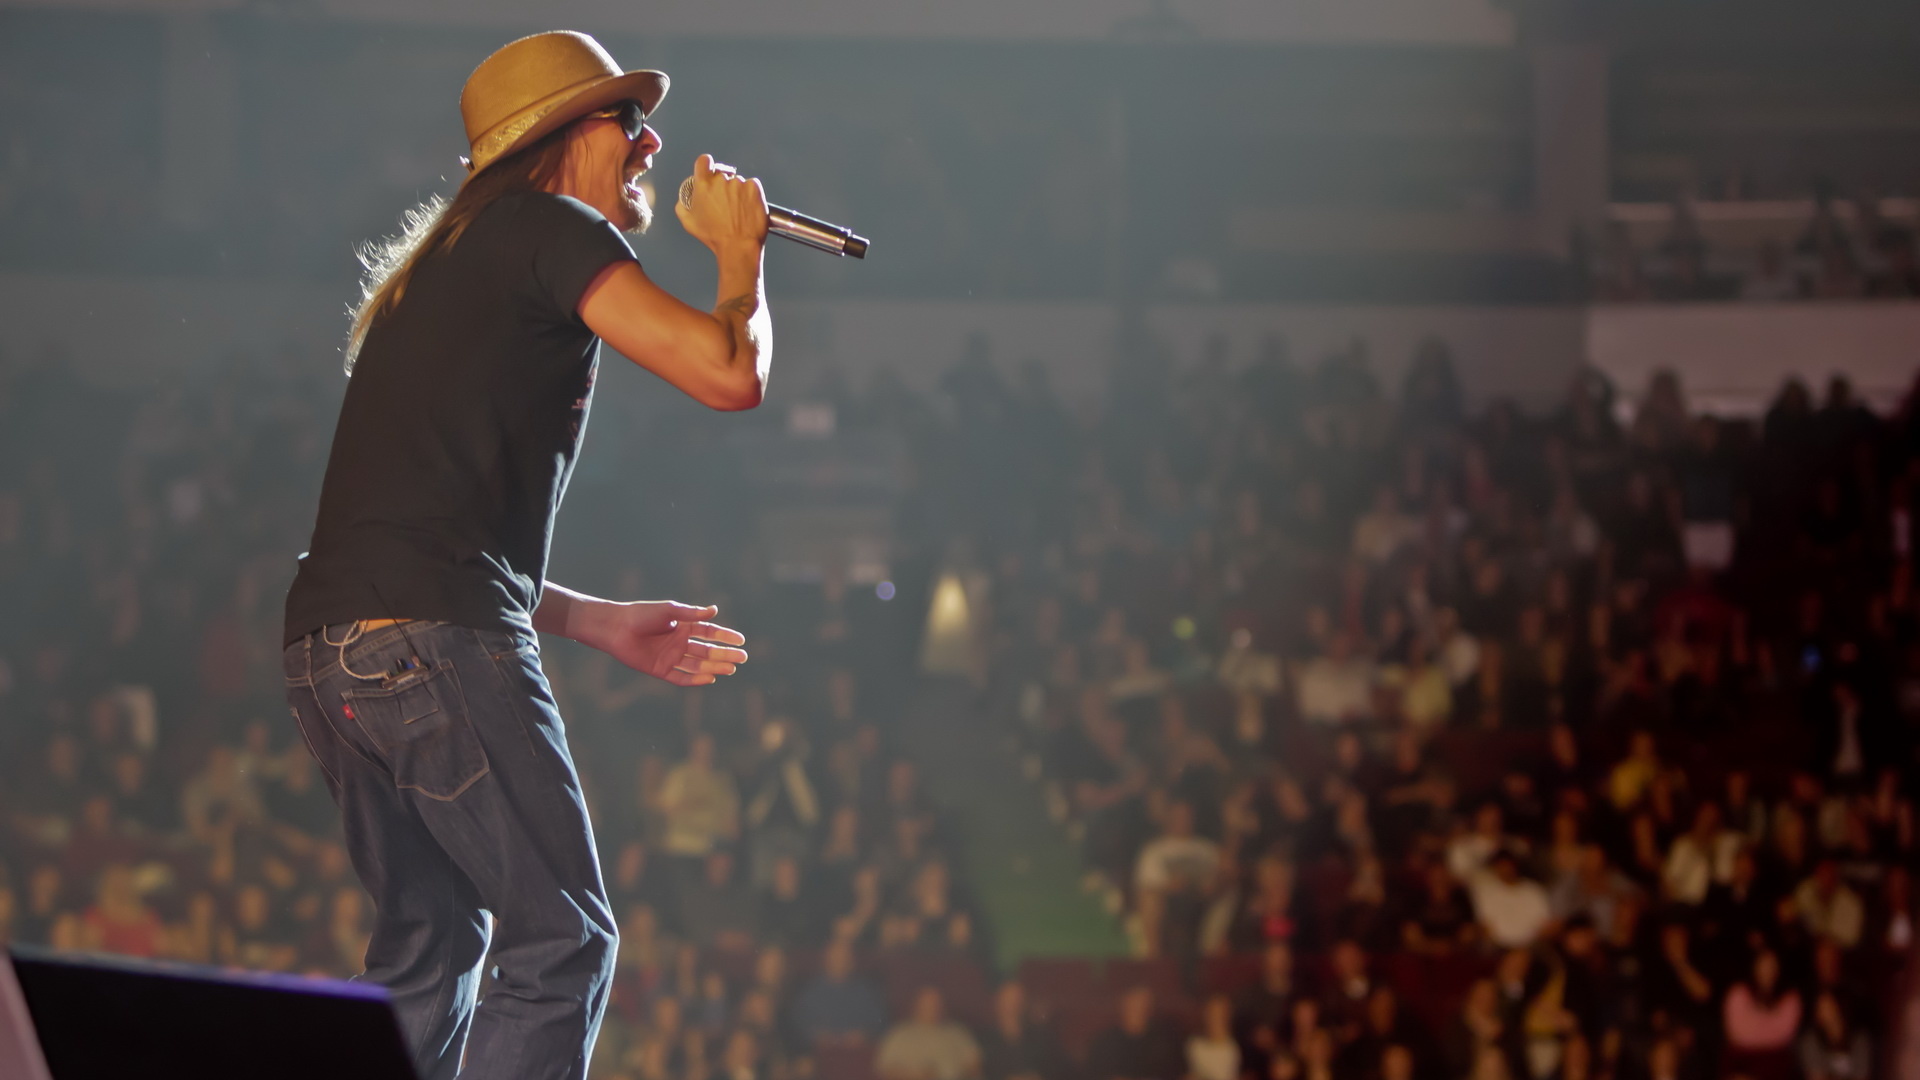 Kid Rock Wallpaper posted by John Anderson 1920x1080